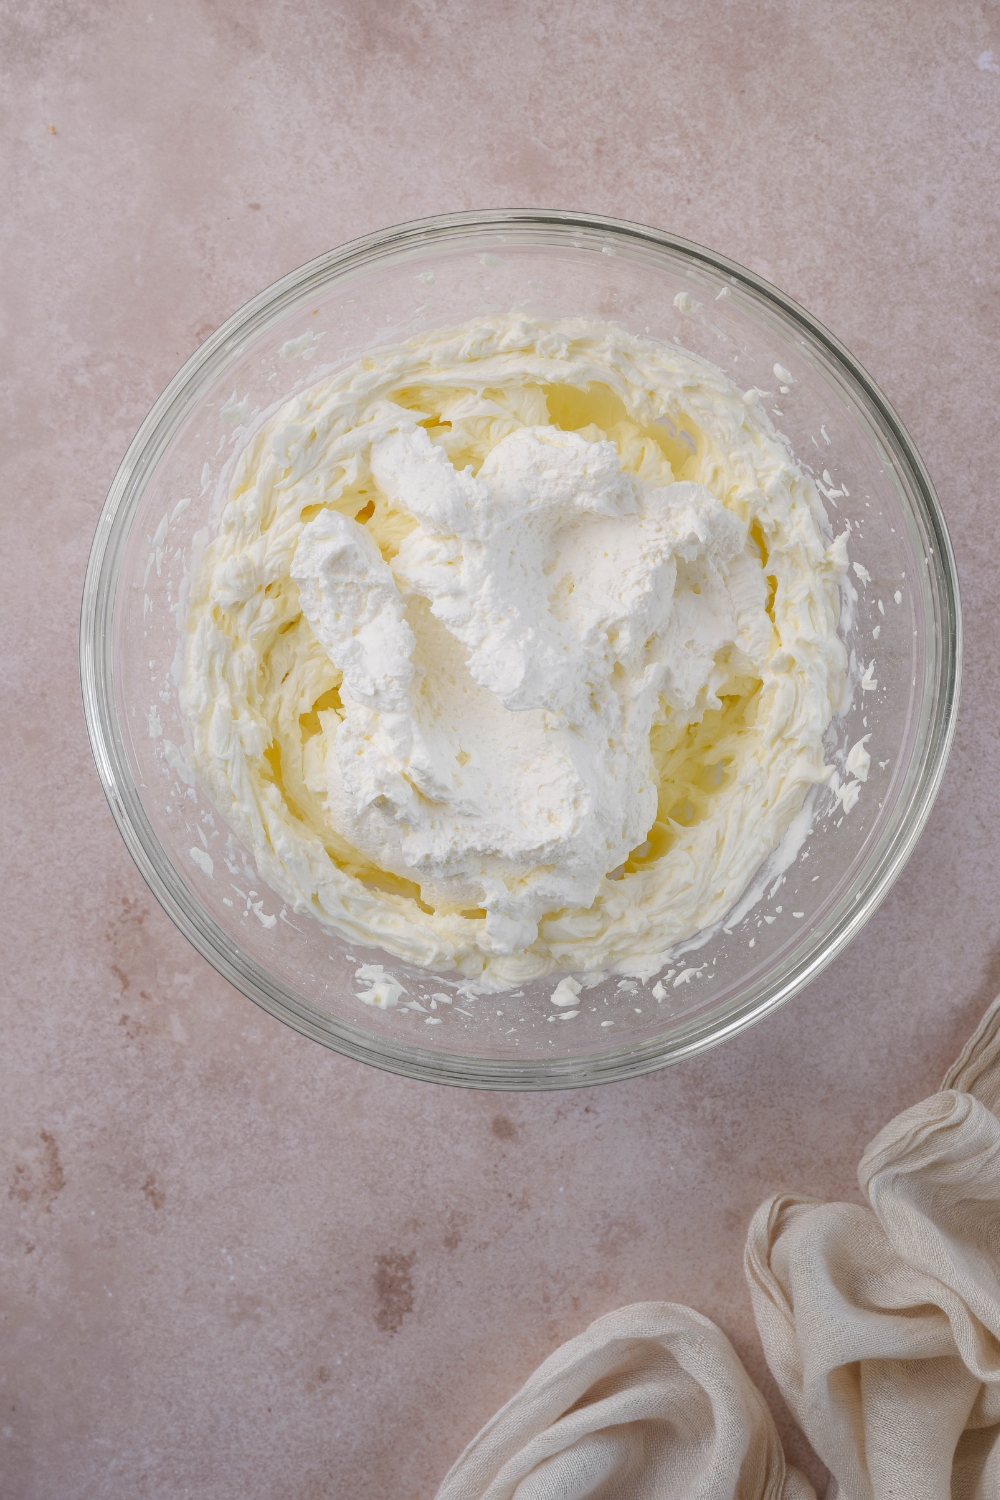 A mixing bowl with the mixed cream cheese filling ingredients; whipped topping has just been added.